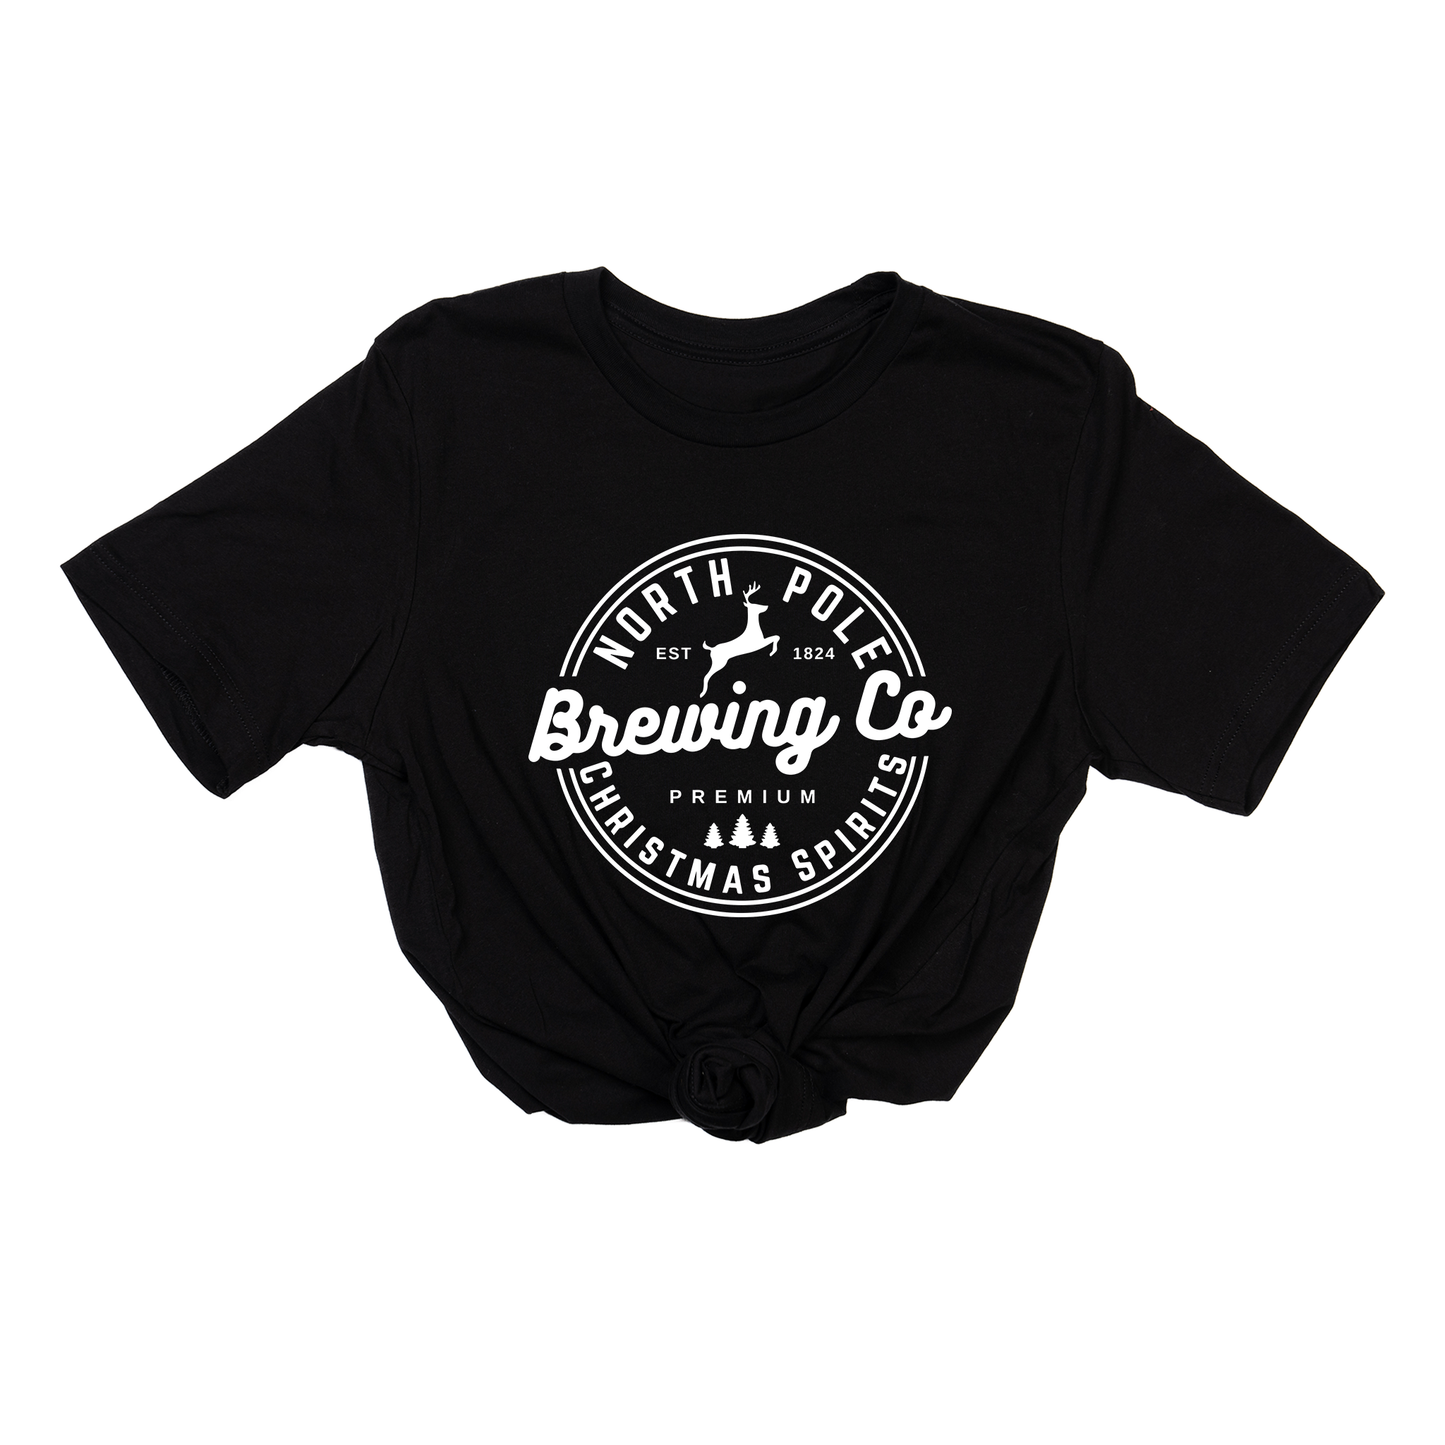 North Pole Brewing Co. (White) - Tee (Black)